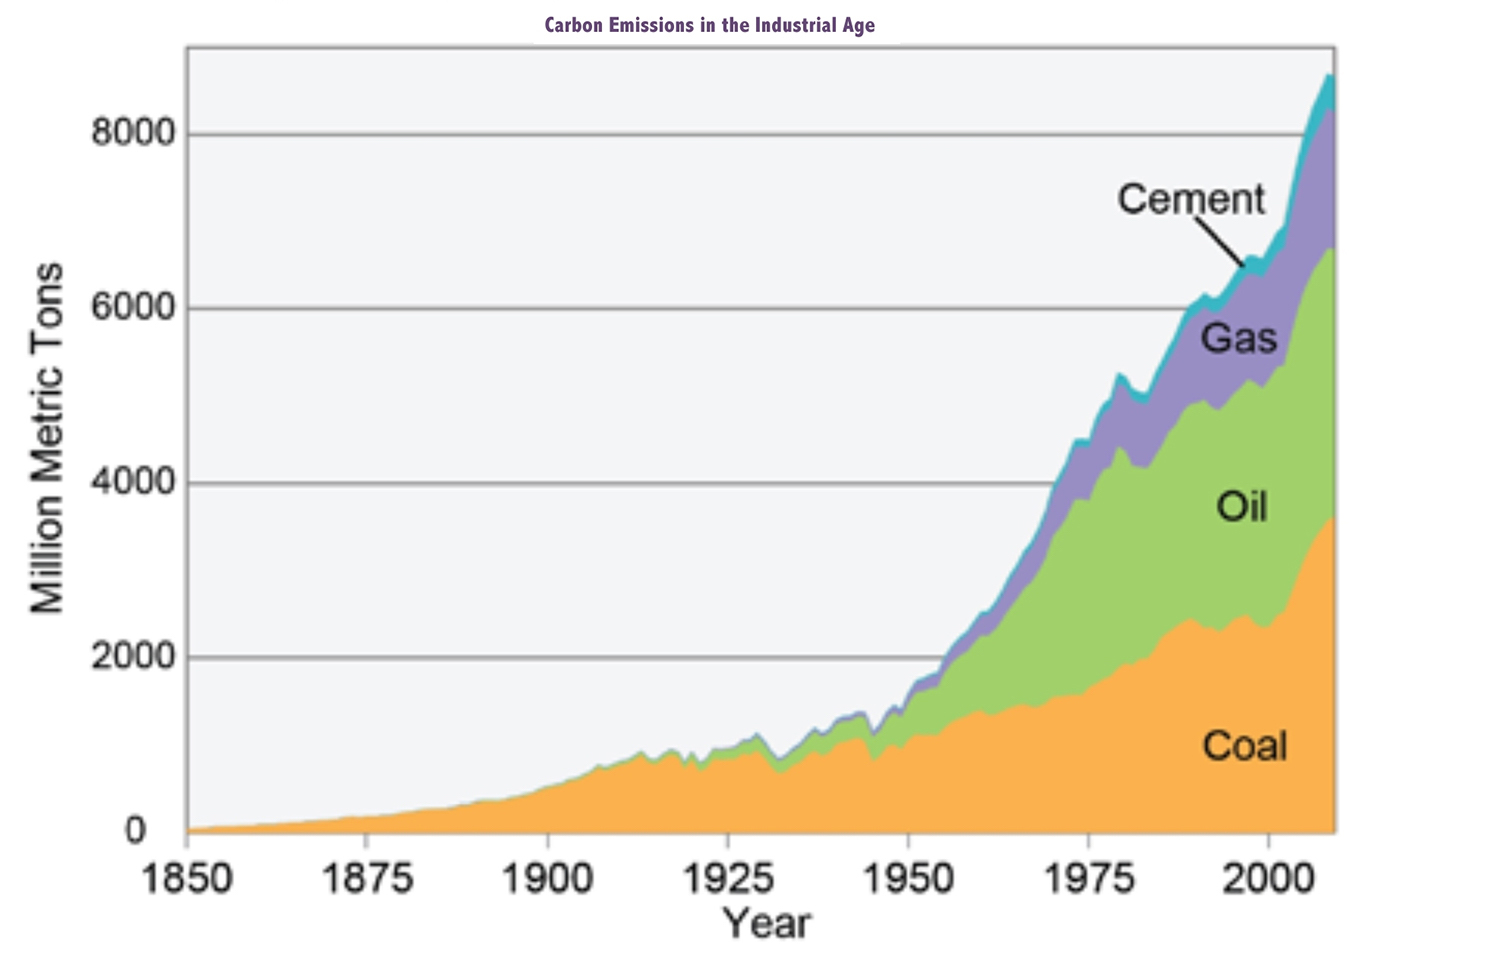 carbon-emissions-in-the-industrial-age-graph.jpeg